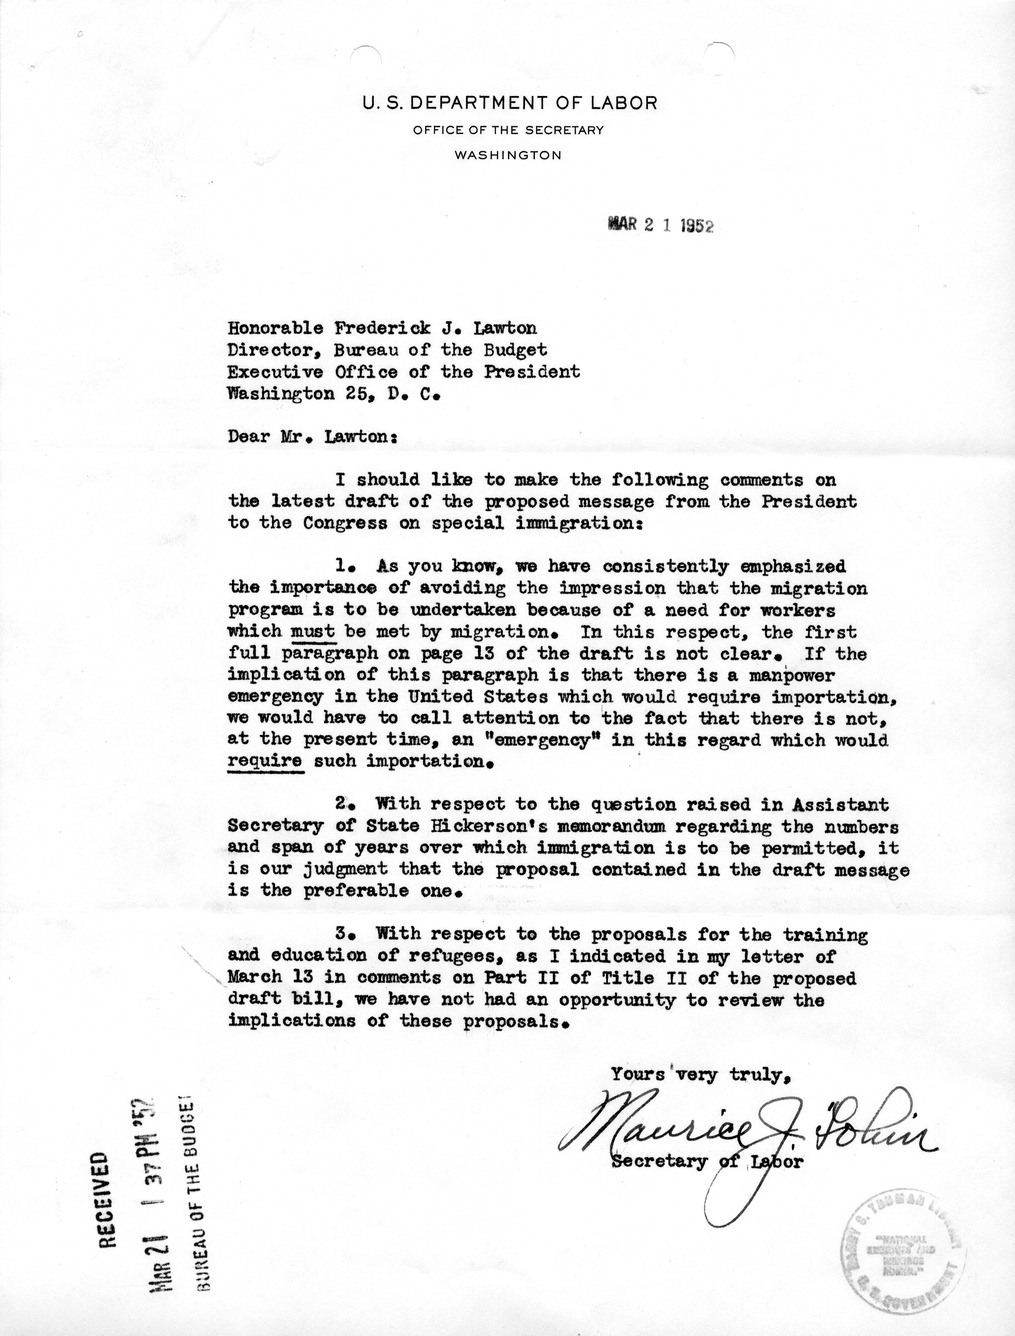 Letter from Secretary of Labor Maurice Tobin to Frederick Lawton